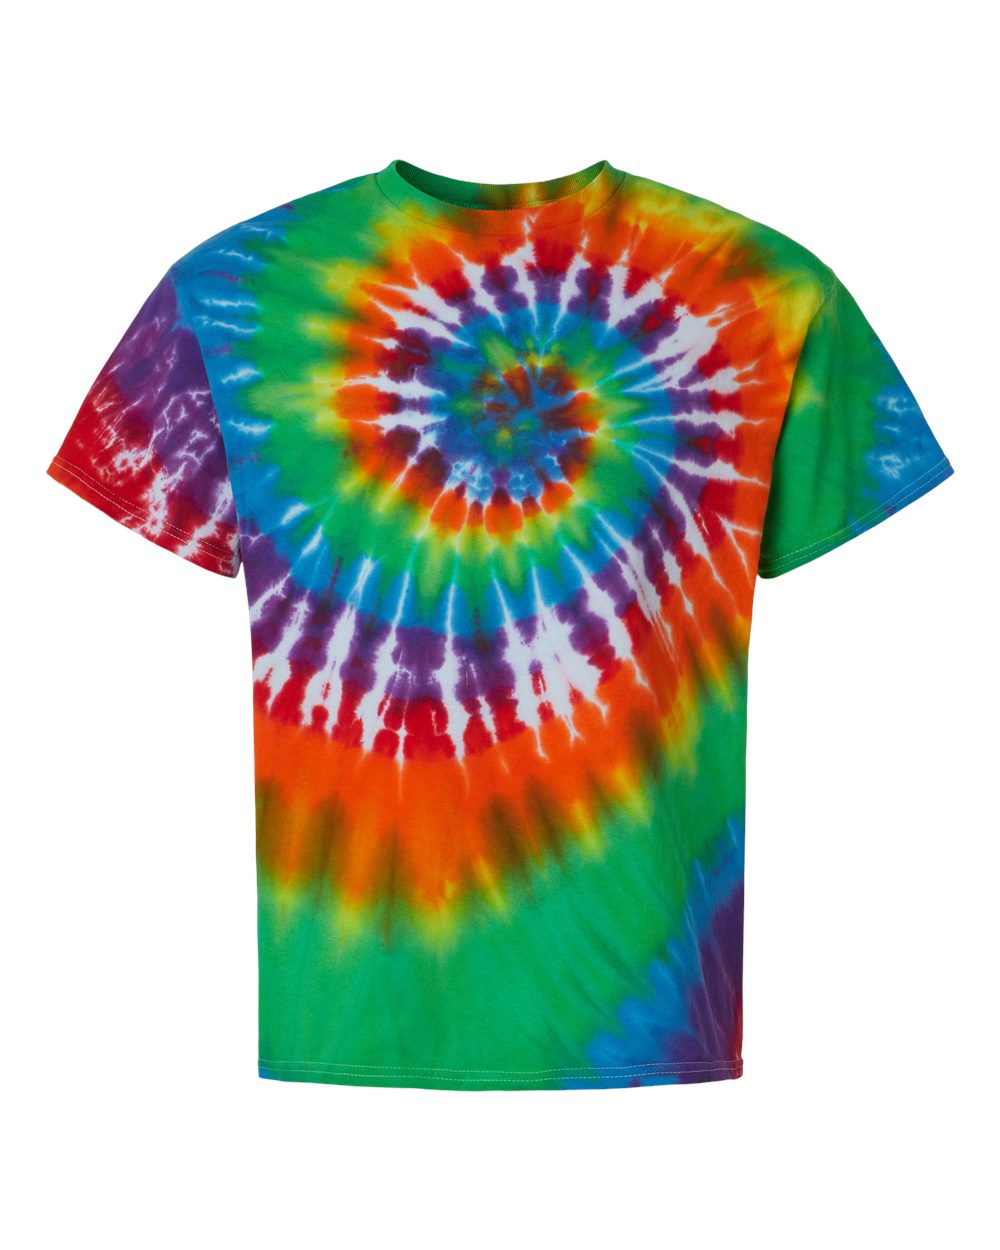 mens tshirts Multi-Color Spiral Tie-Dyed T-Shirt